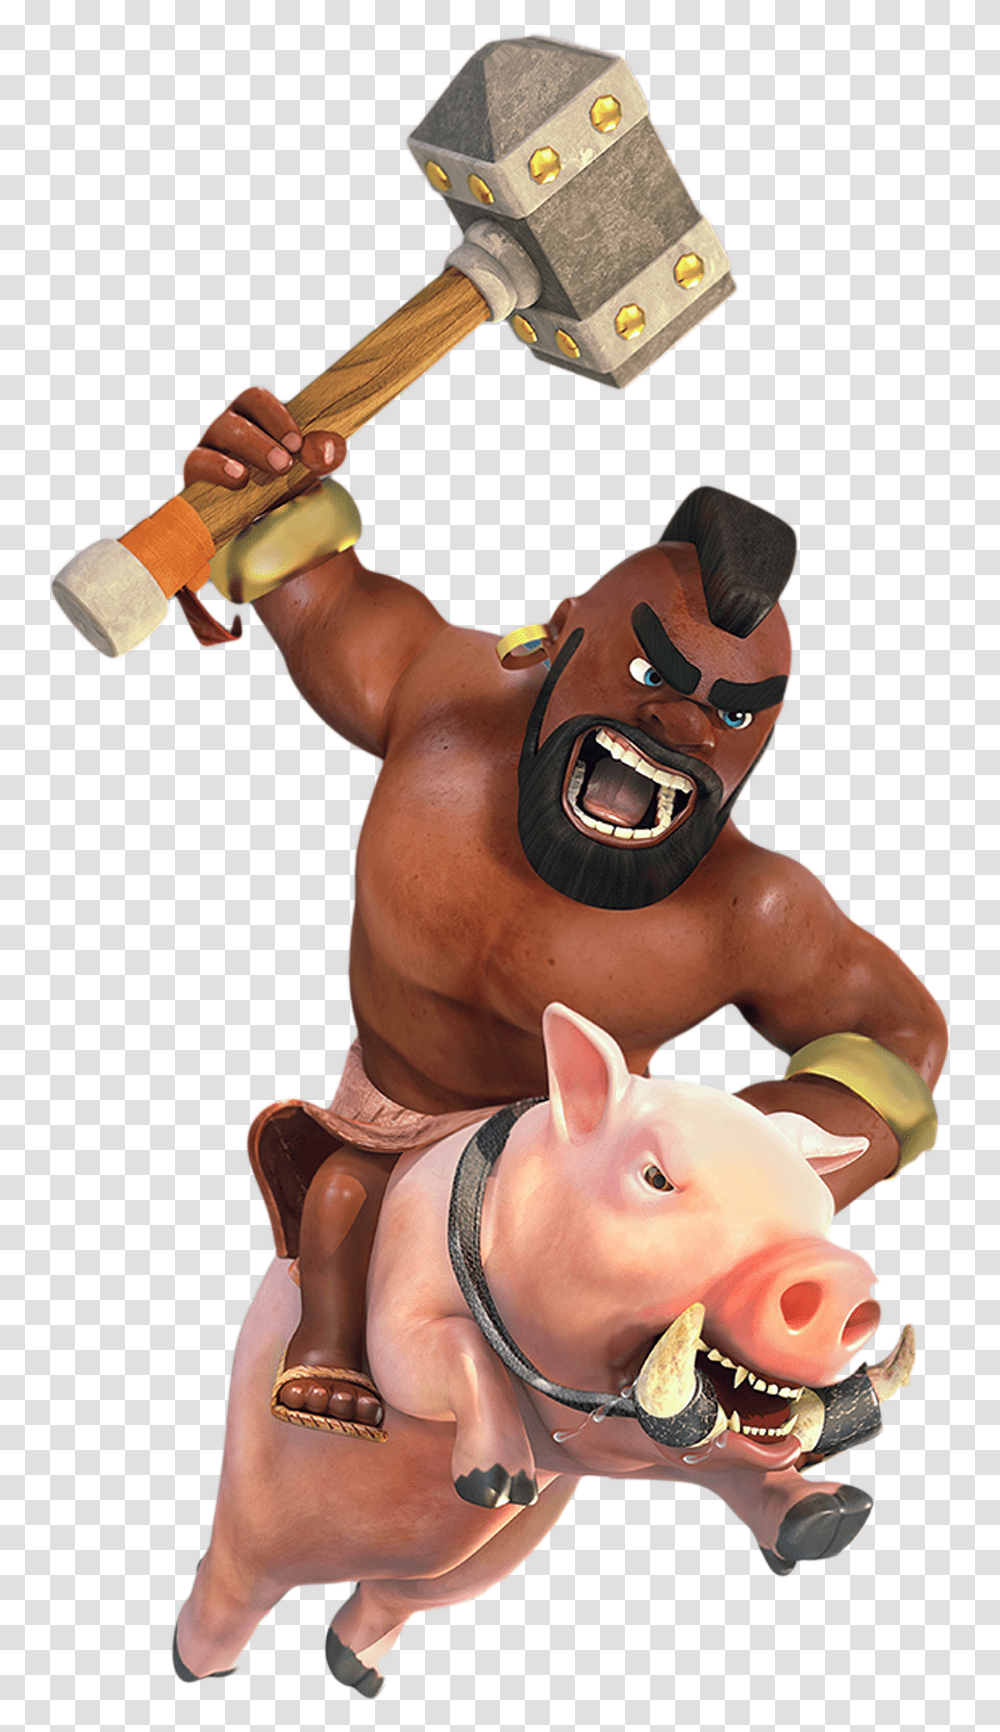 Pig Figurine Royale Clans Hq Image Hog Rider, Hammer, Tool, Person, Human Transparent Png